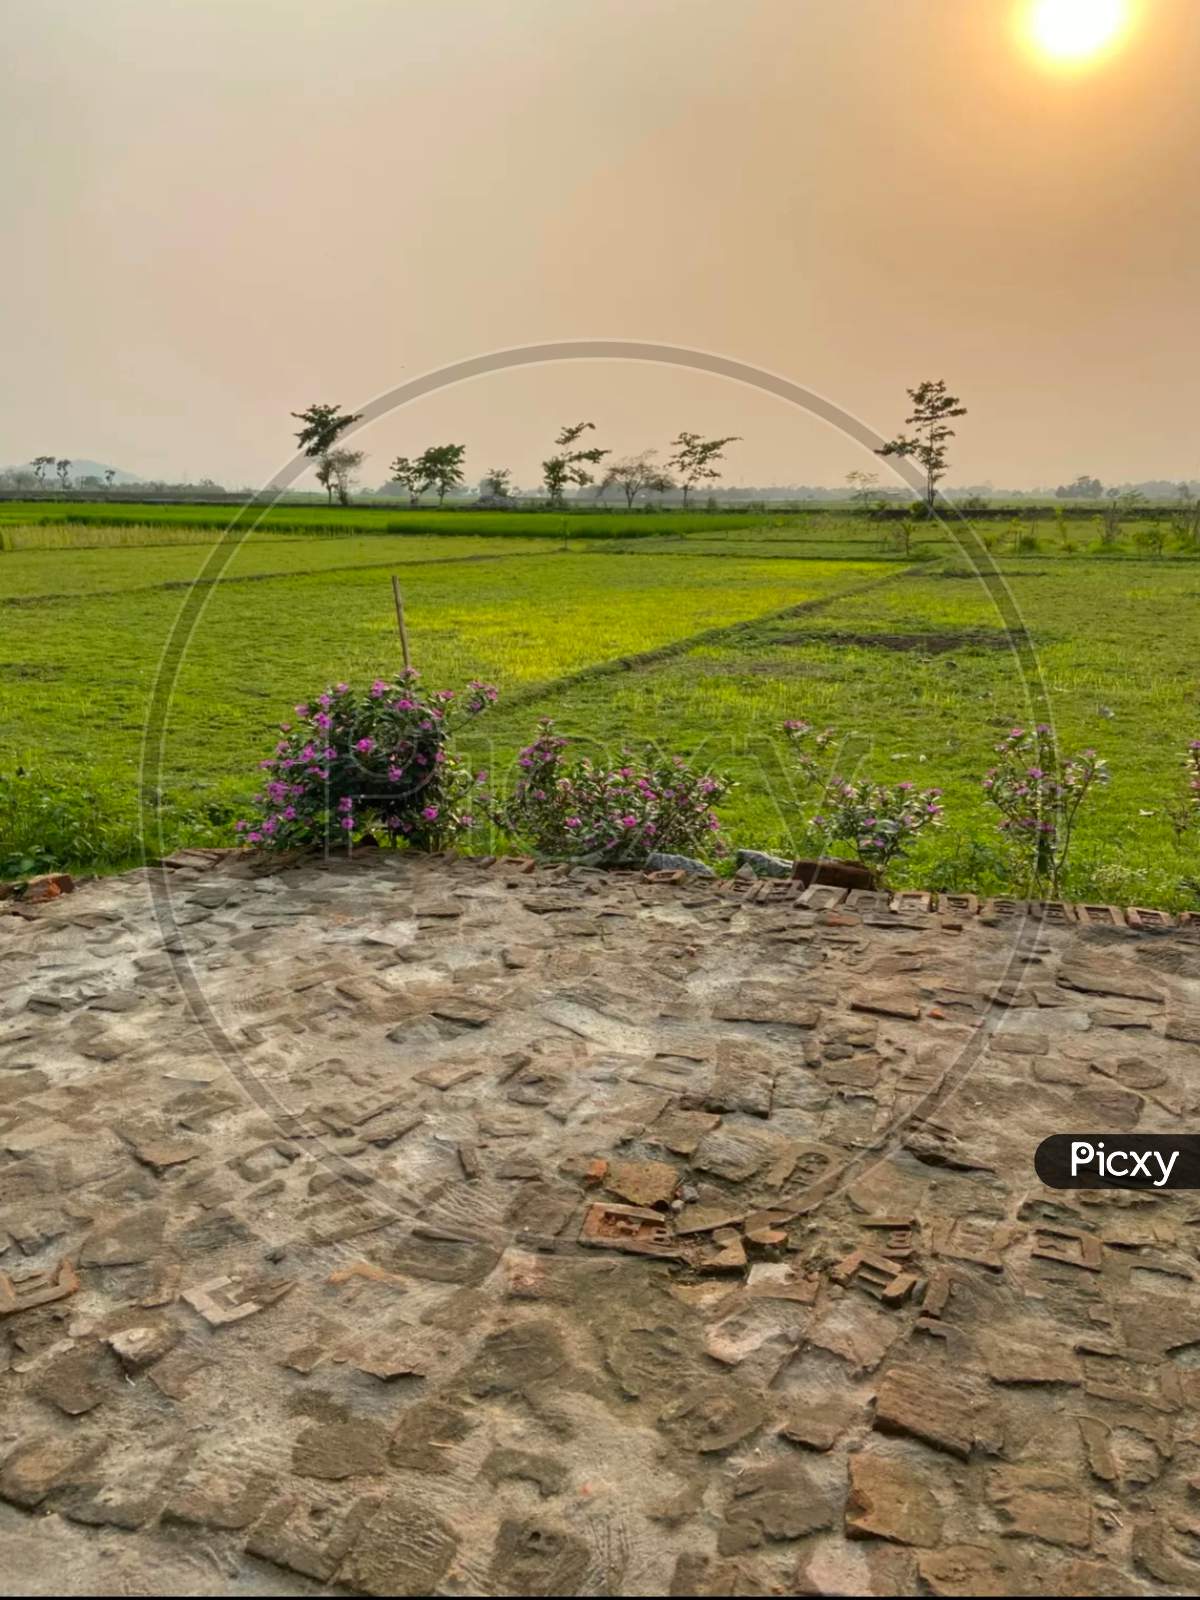 Panoramic Photography of Green Field